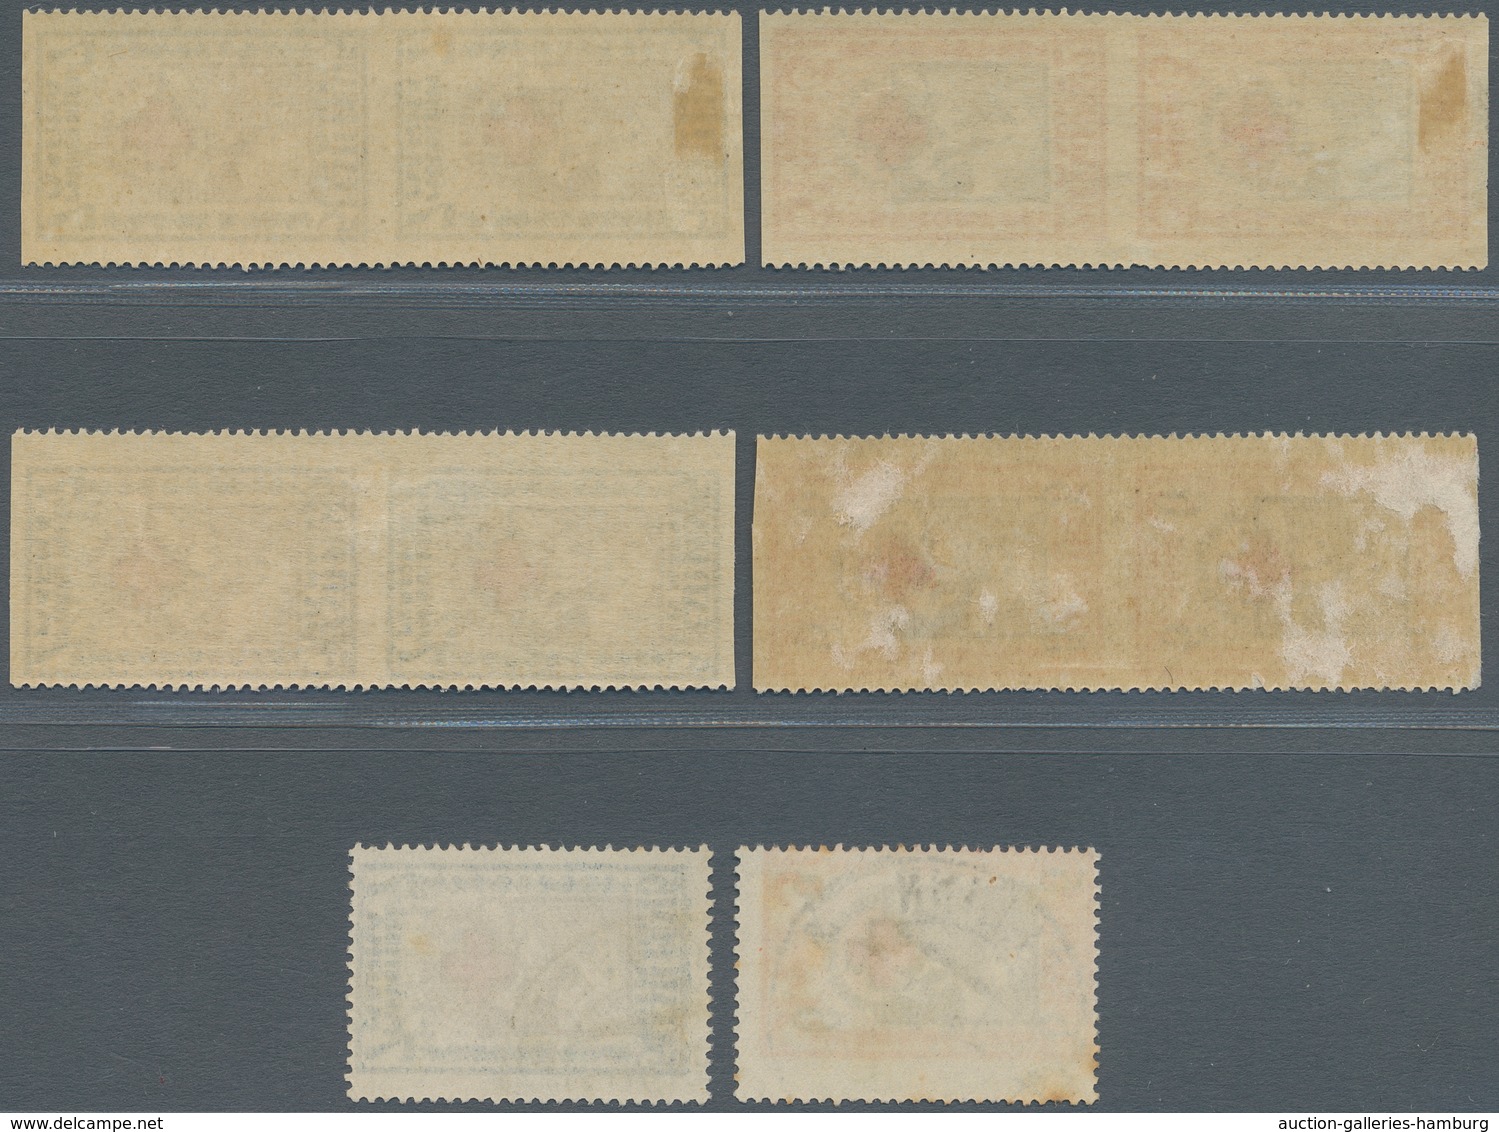 Estland: 1921 - 1924, Red-cross 2 1/2 Sts / 3 1/2 Sts And 5 Sts / 7 Sts And Overprint Issue, Each In - Estonie